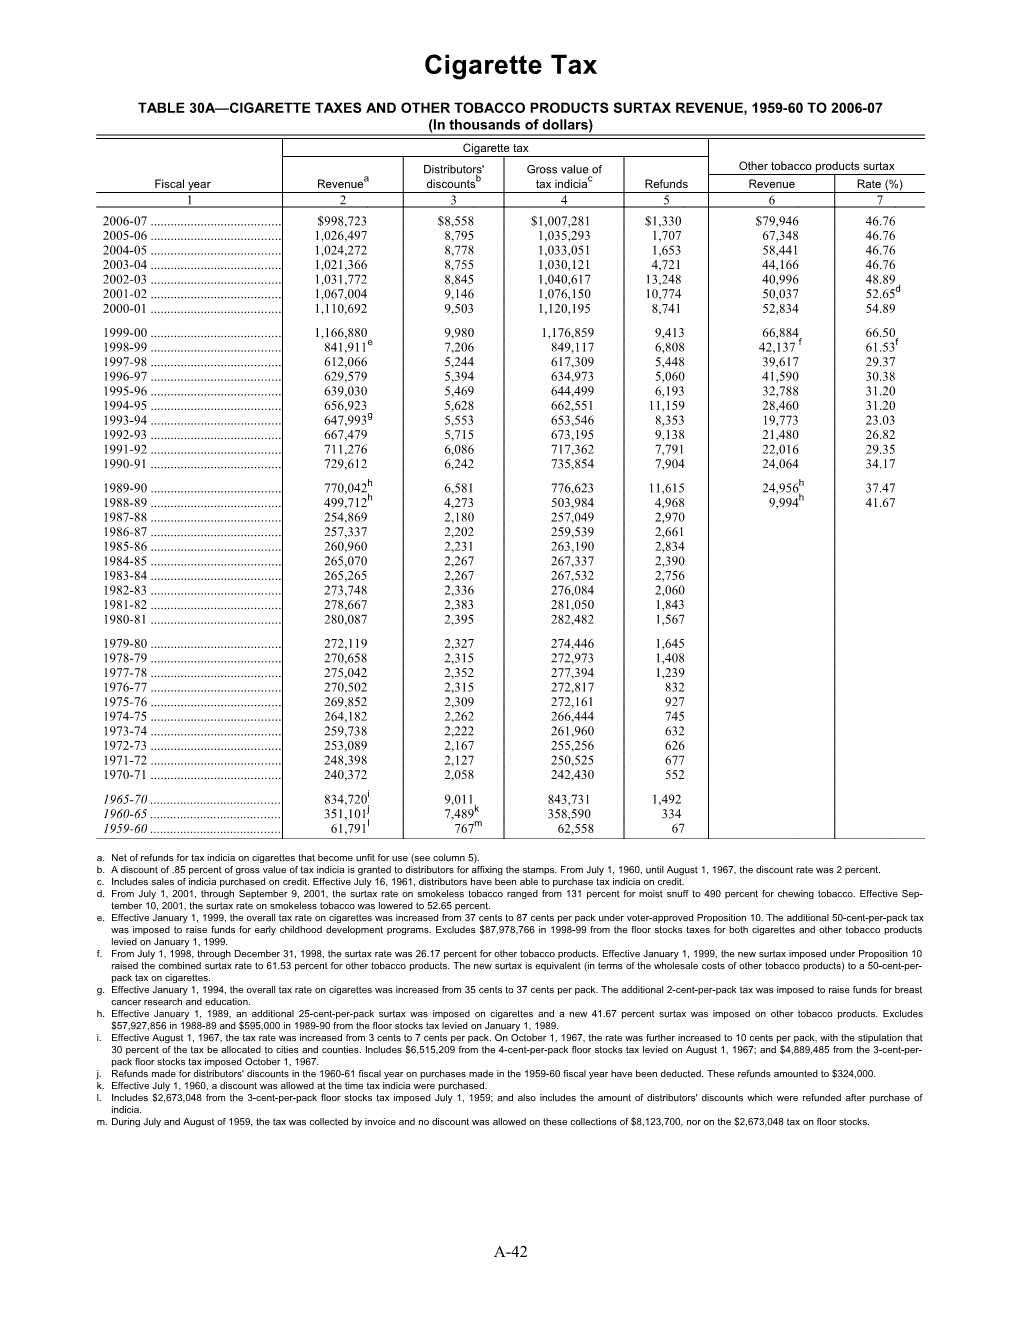 Table 30A Cigarette Taxes and Other Tobacco Products Surtax Revenue, 1959-60 to 2006-07